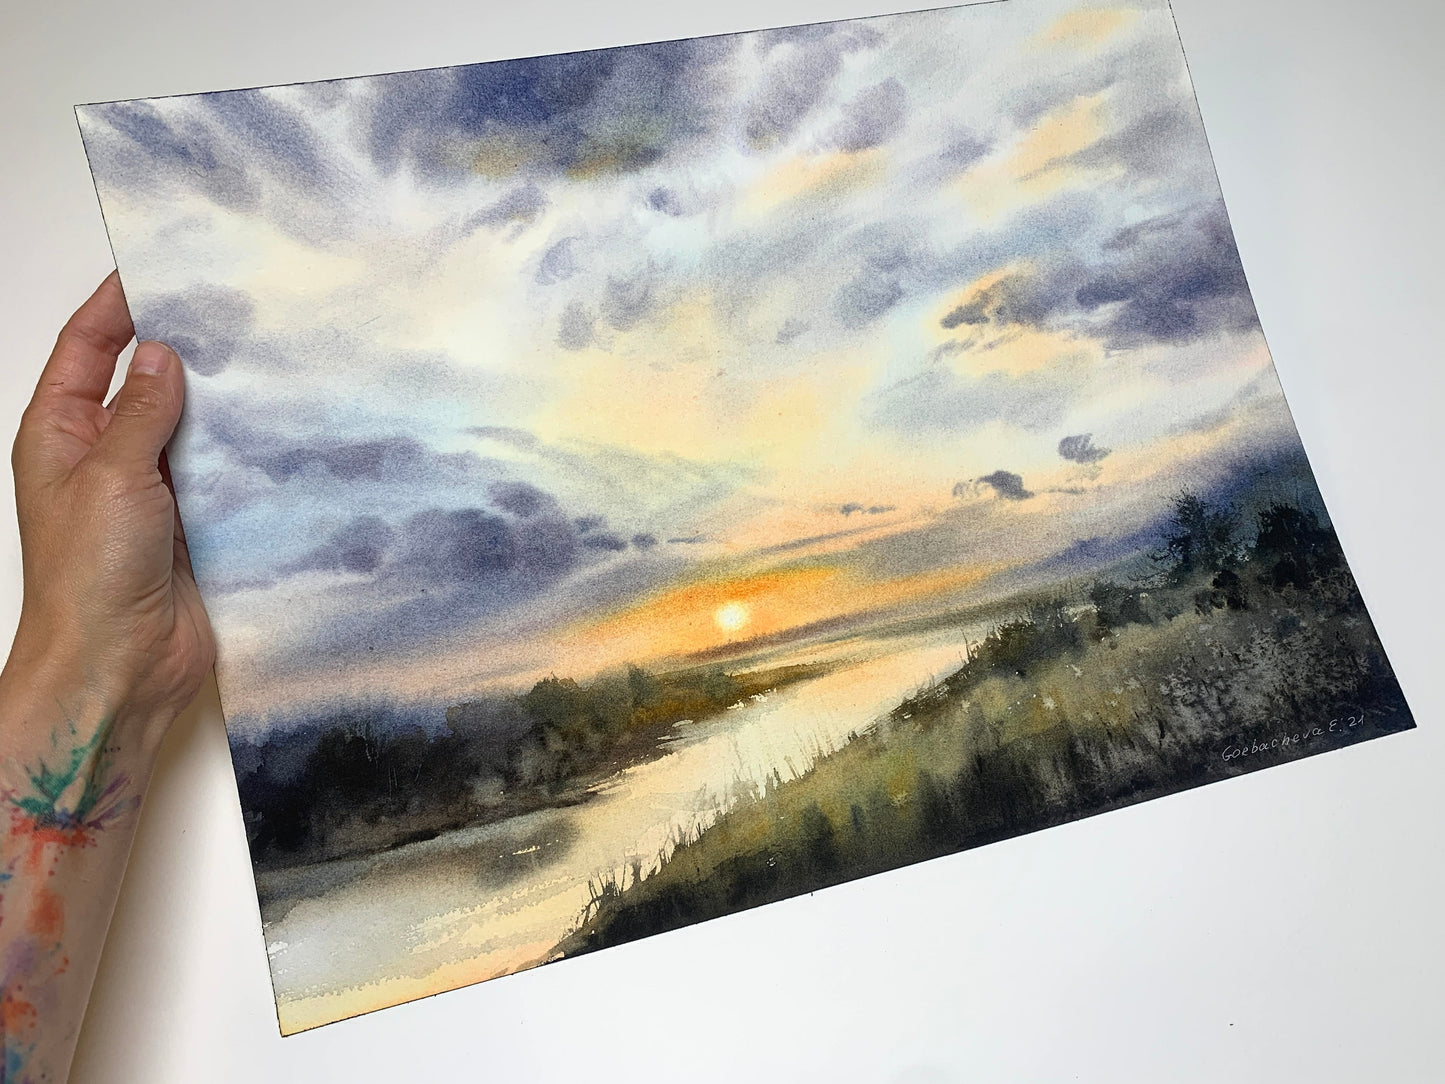 Rural Landscape Painting, Country Field Watercolor Original, Nature Art, Sunset River Wall Decor, Cloud Sky, Gift